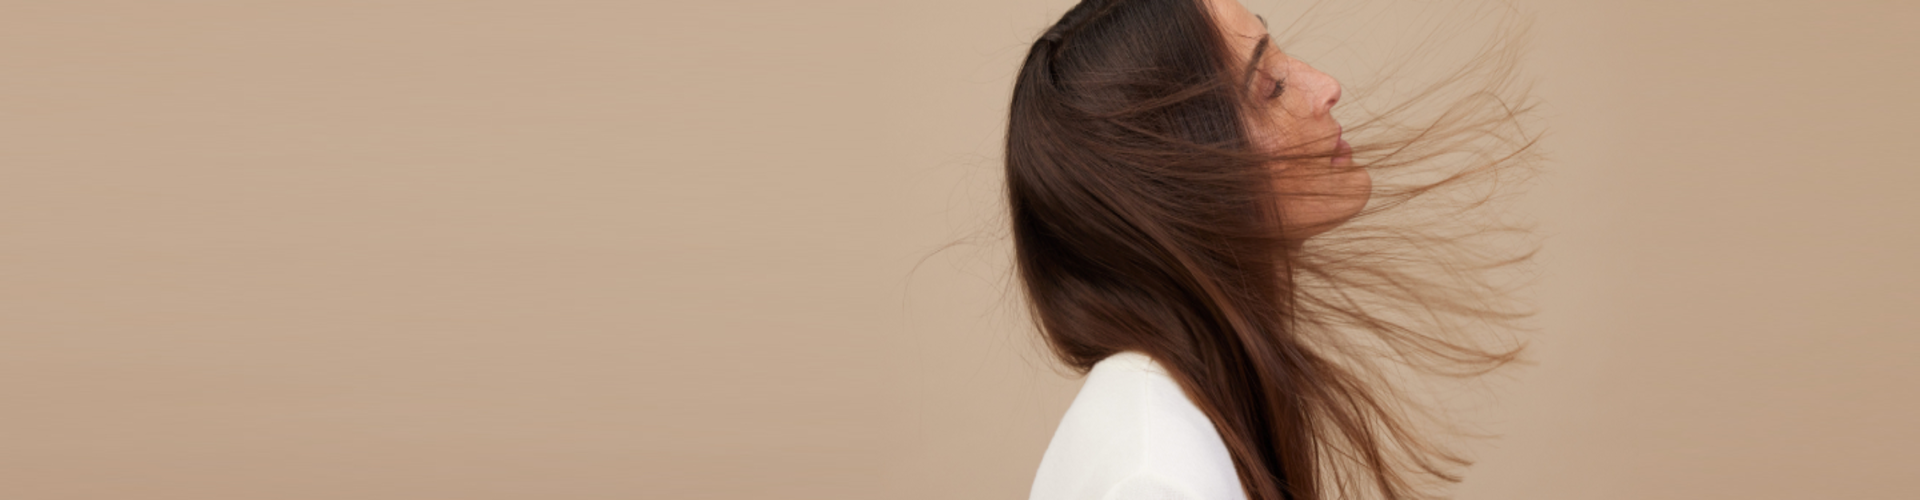 Dry, coarse hair: how do you hydrate and nourish it?